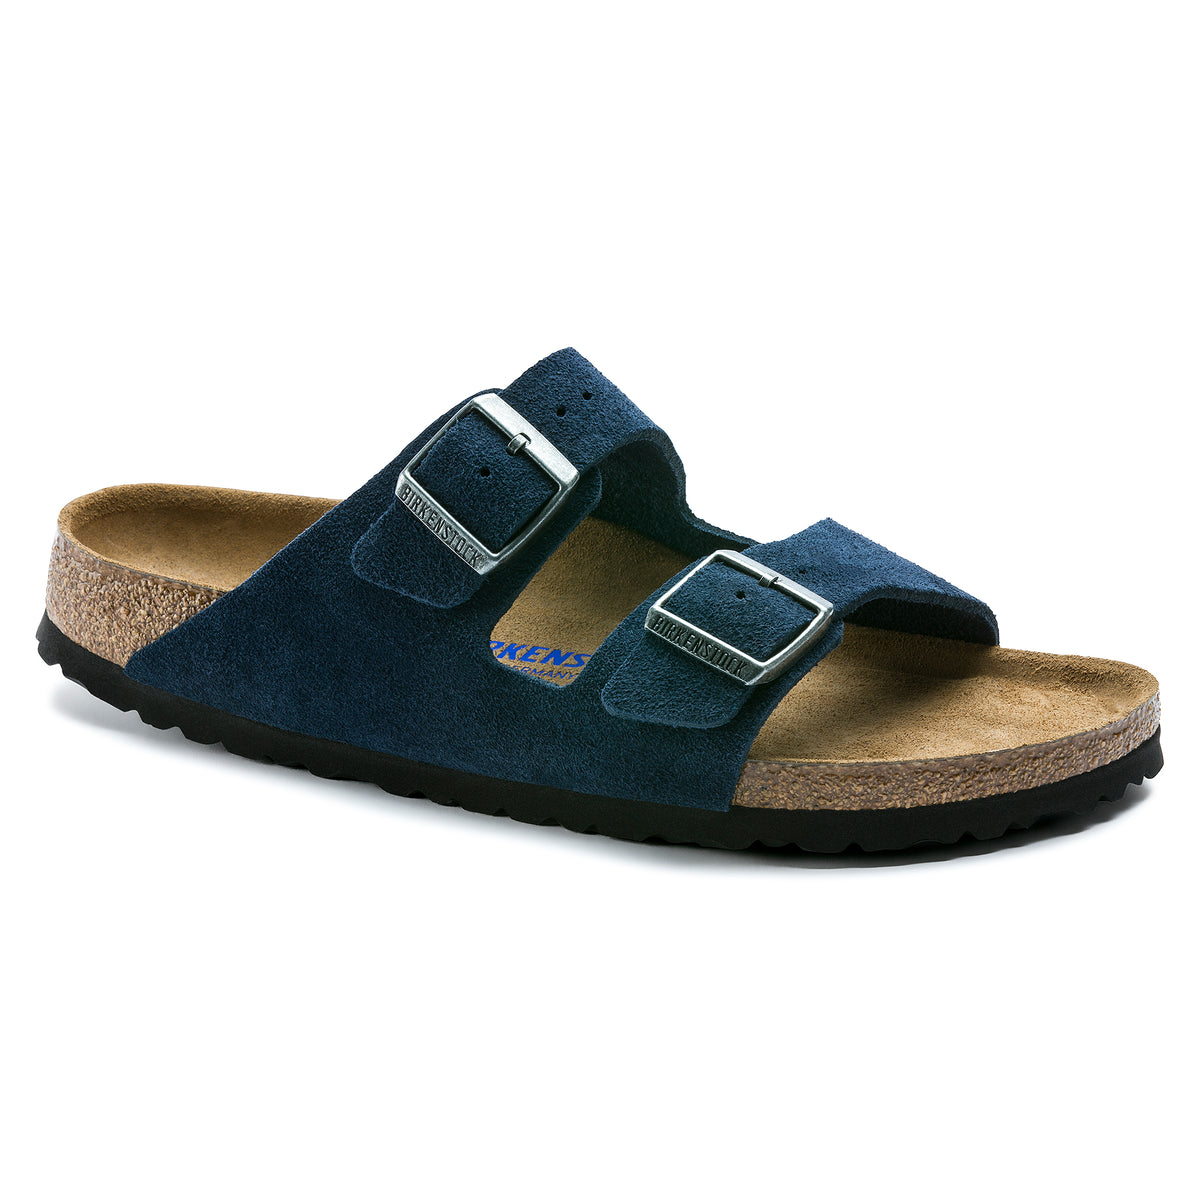 Birkenstock Limited Edition Arizona Soft Footbed night suede with black sole